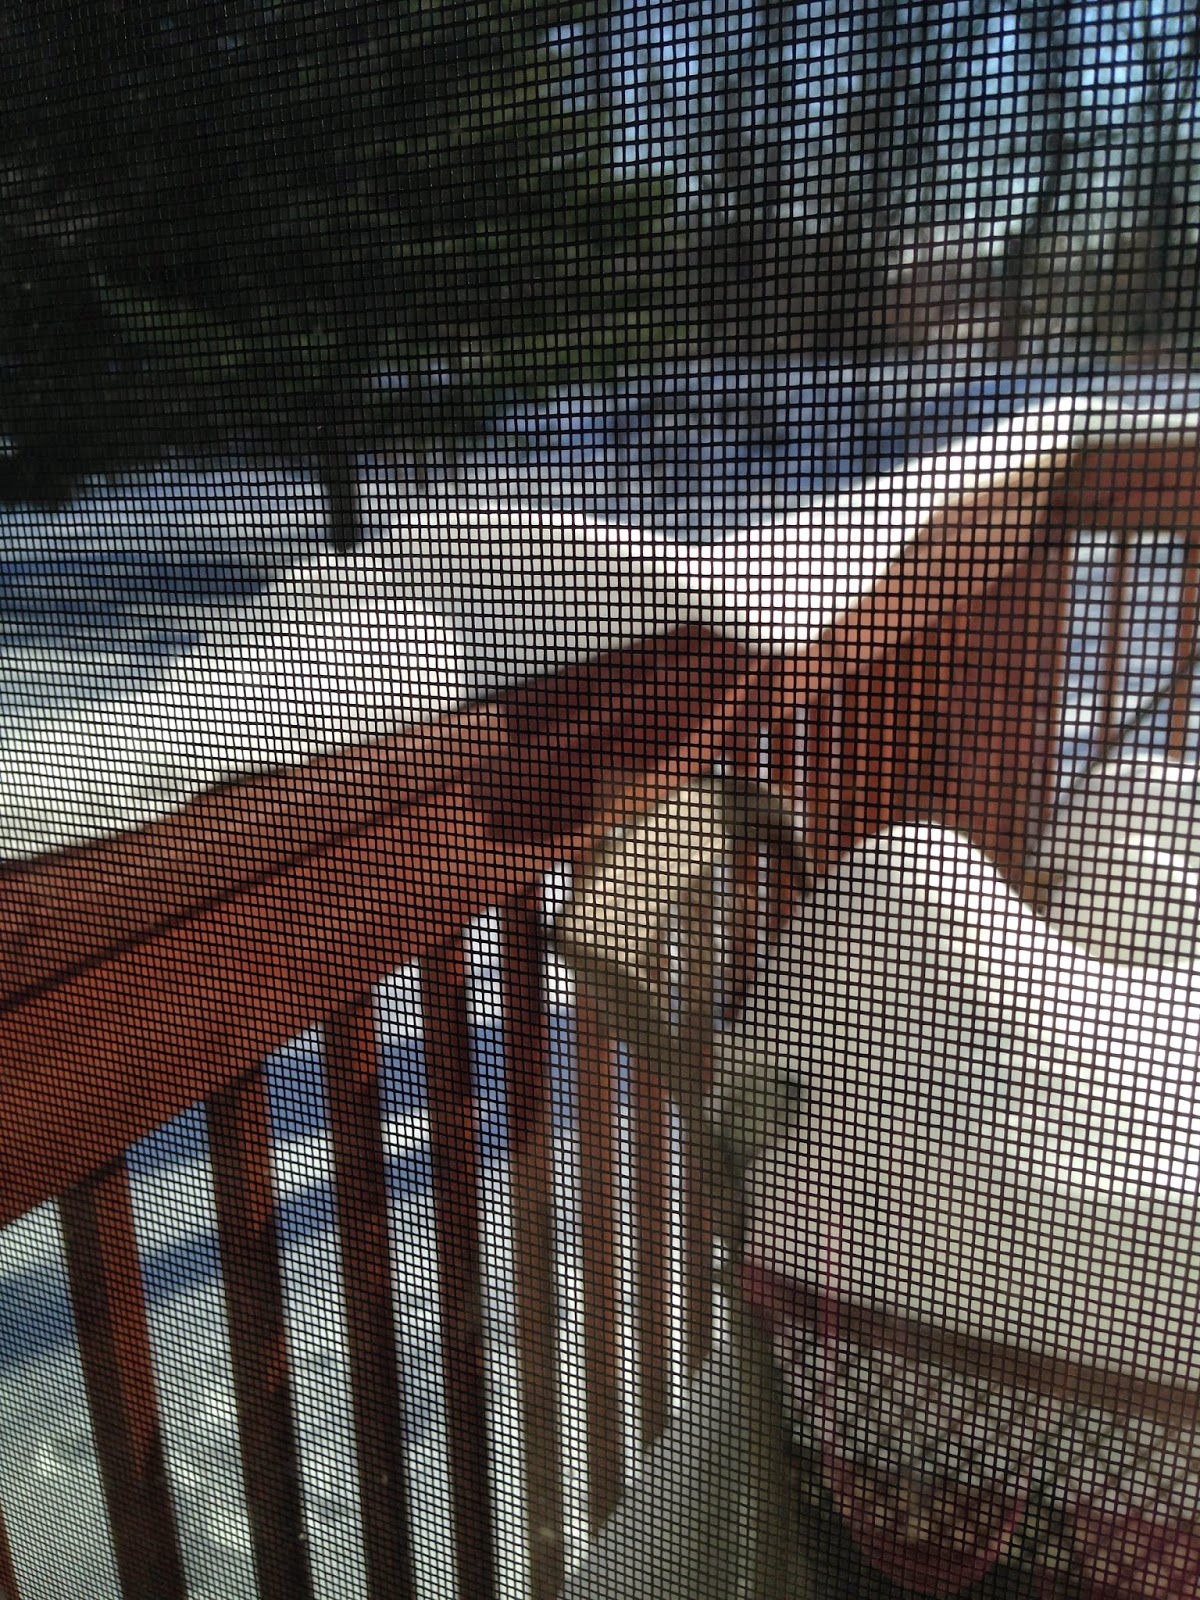 snow collapsing from porch railing